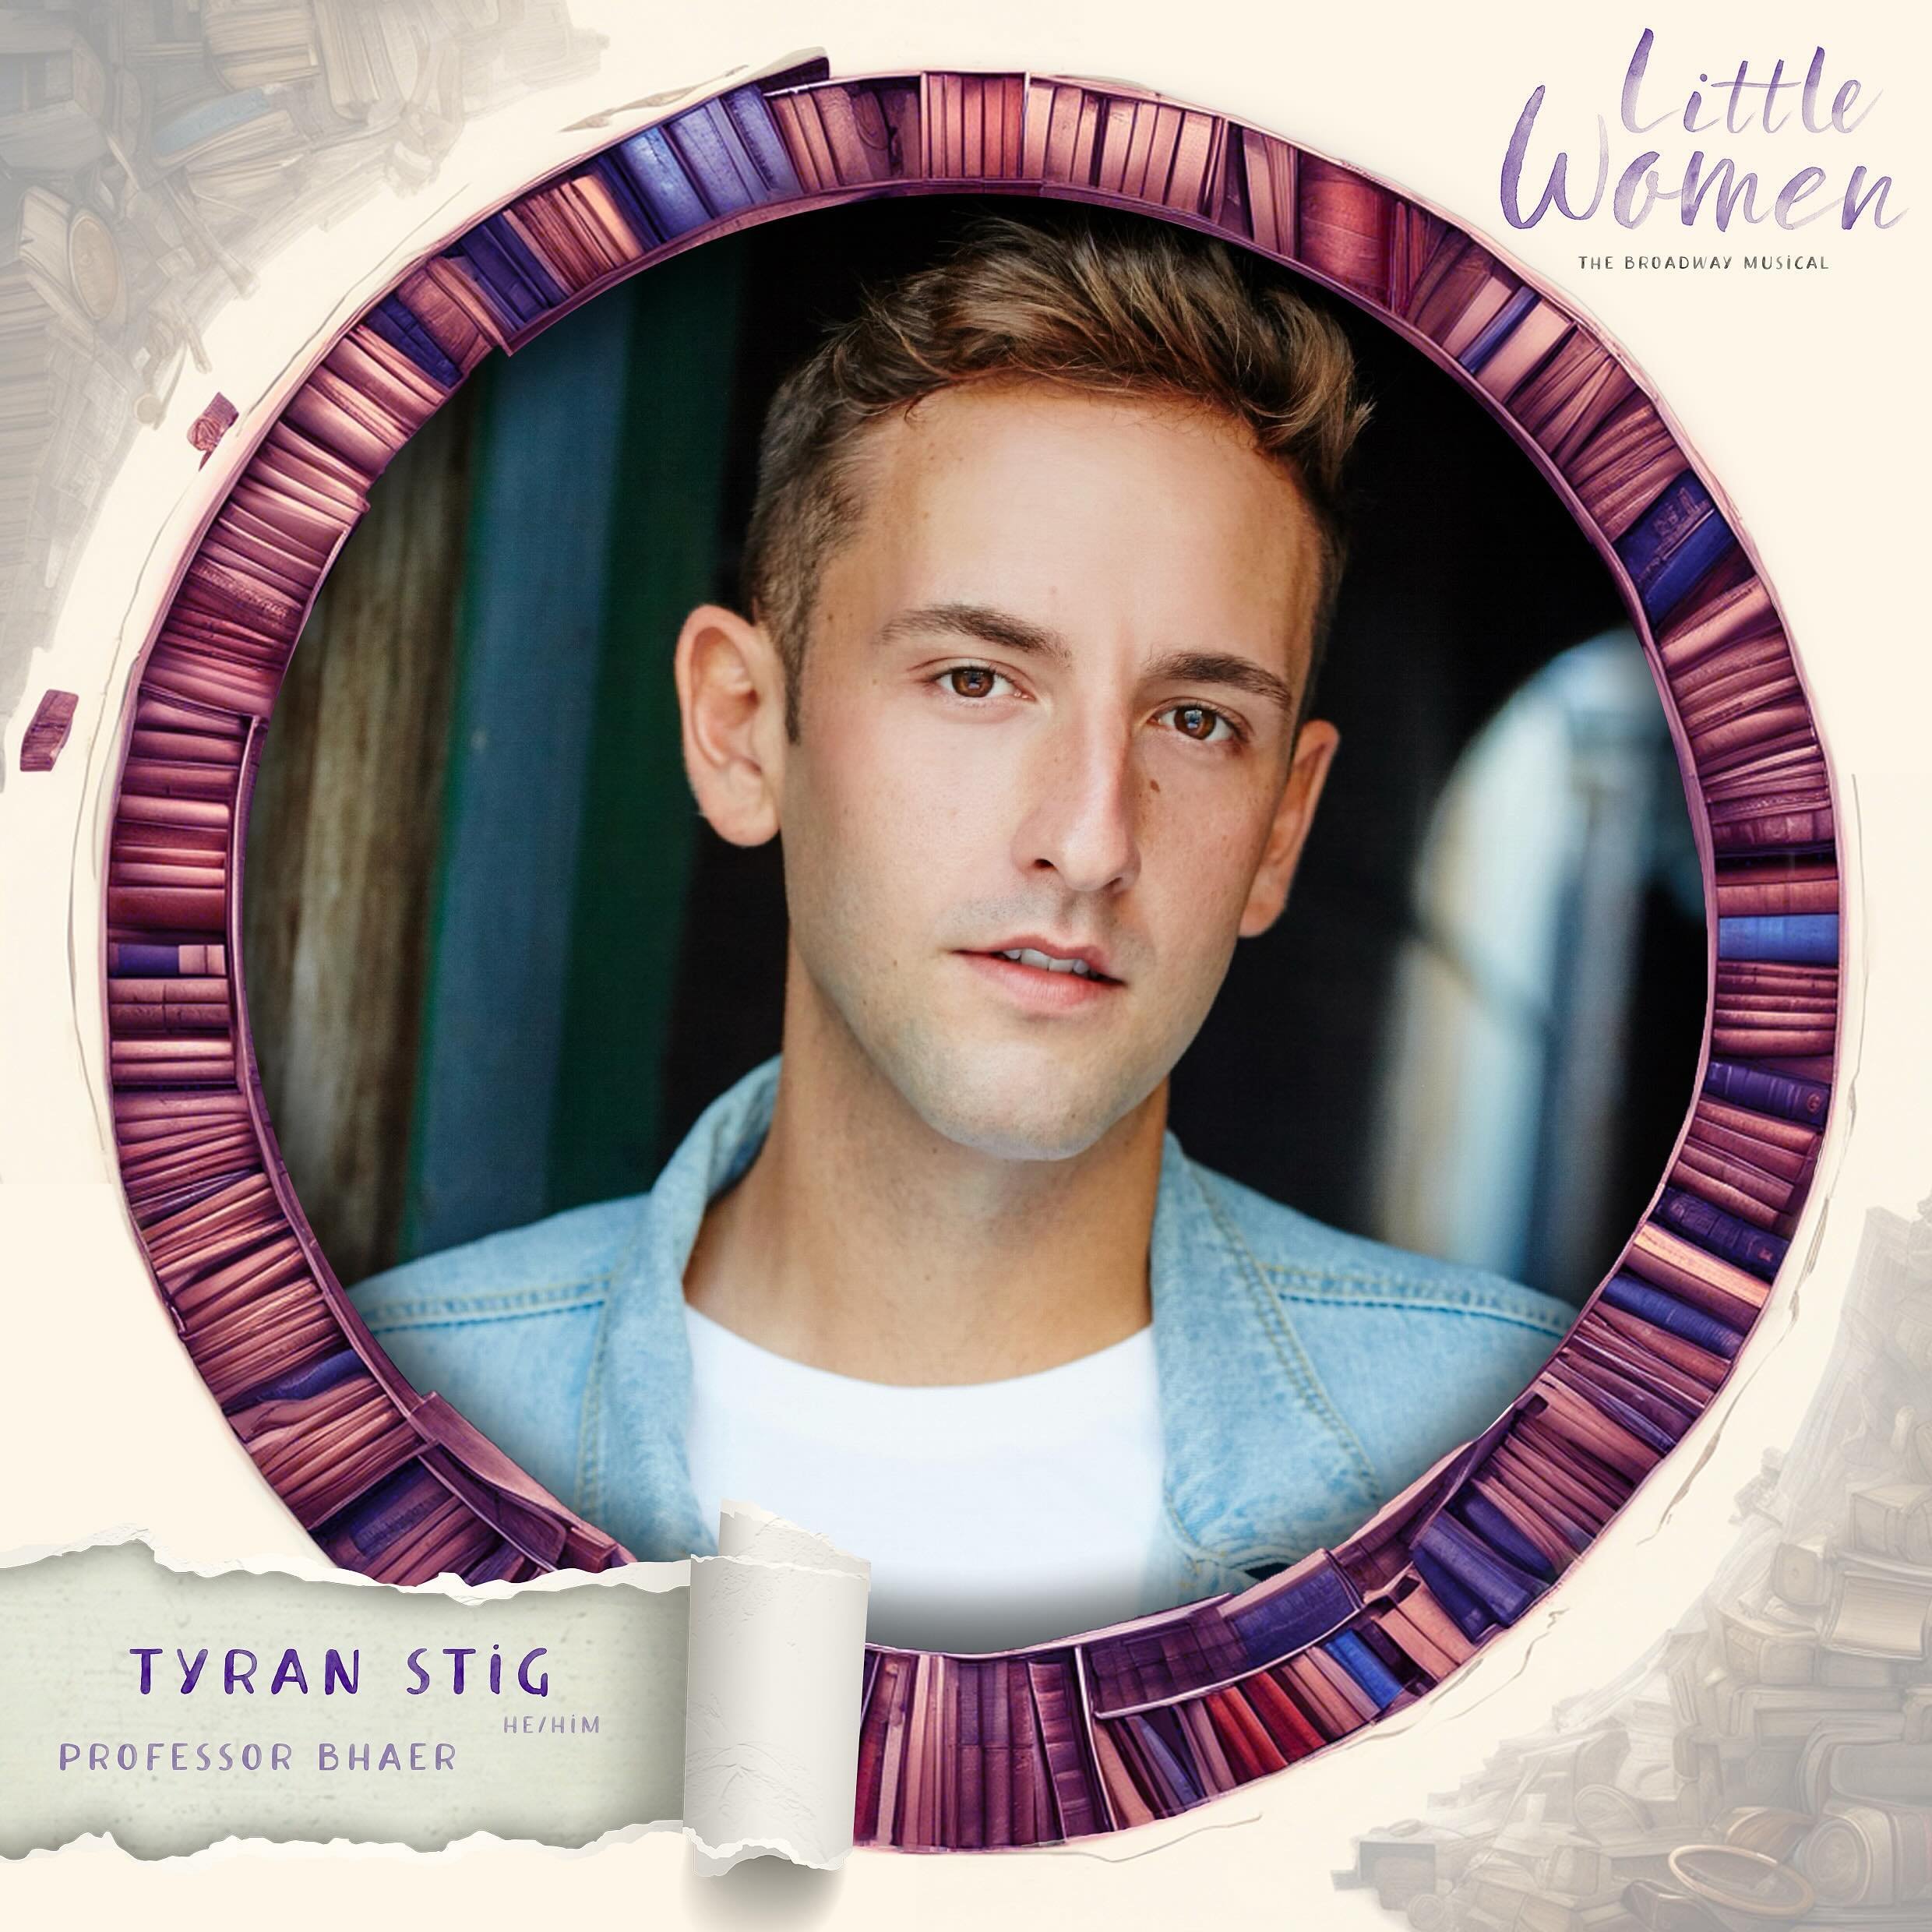 It&rsquo;s been a big week of cast announcements, and we have another not-so-little one to share&hellip; 📣 
T&amp;E&rsquo;s super talented @tyranstig will be appearing in @jrpaustralia upcoming production of &lsquo;Little Women&rsquo; as Professor B